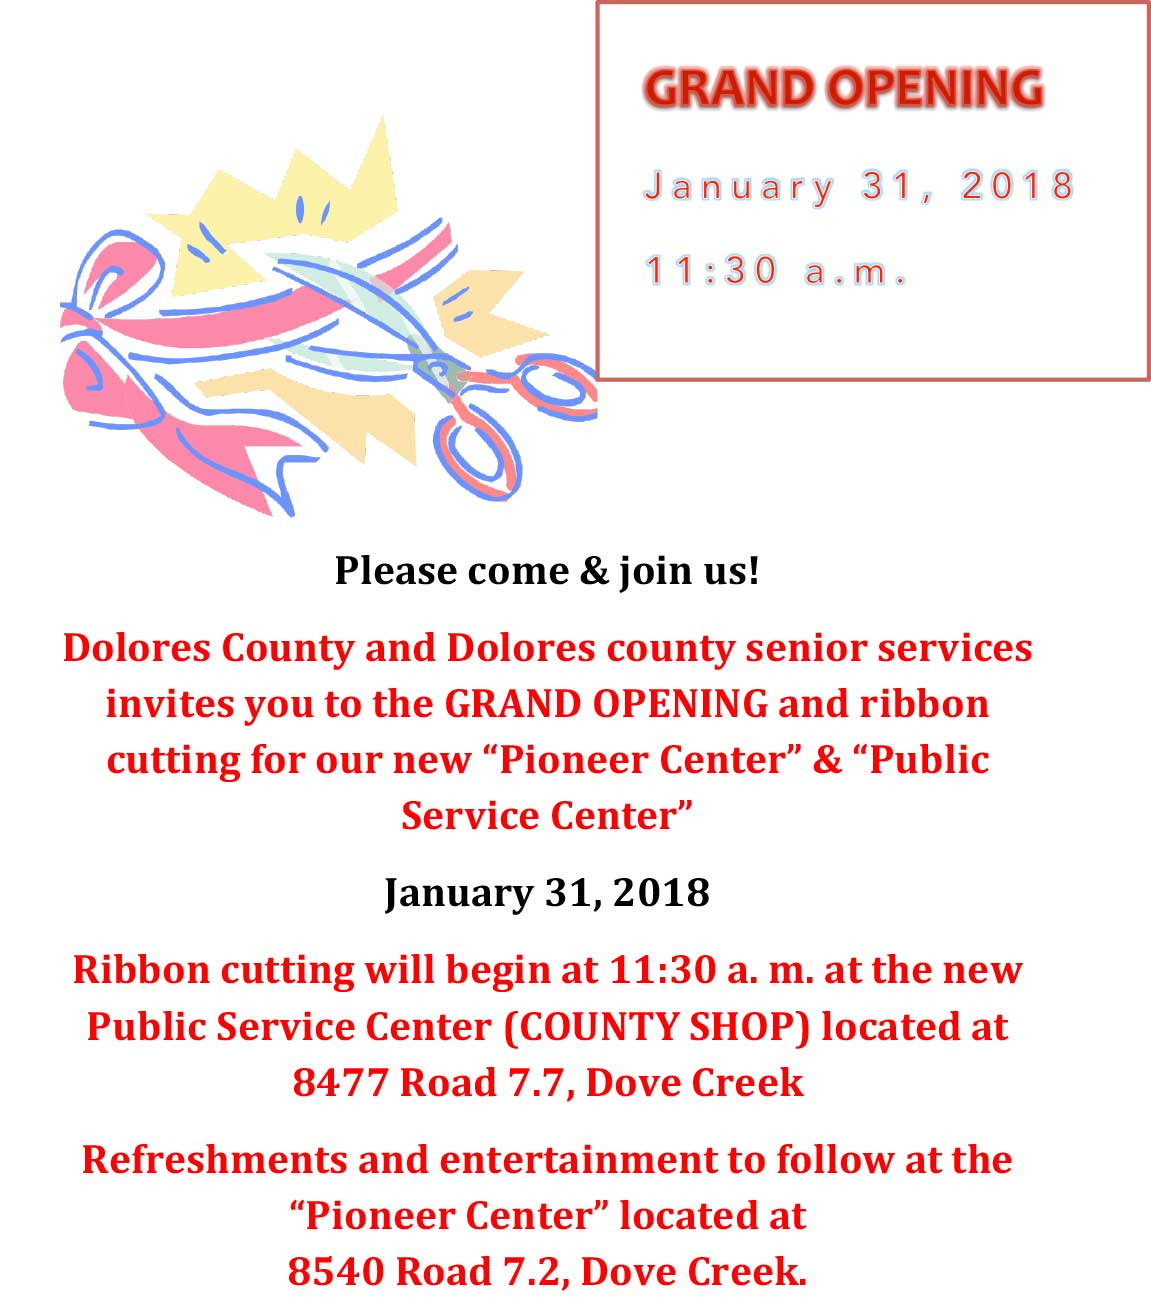 DELORES-GRAND-OPENING-FLYER